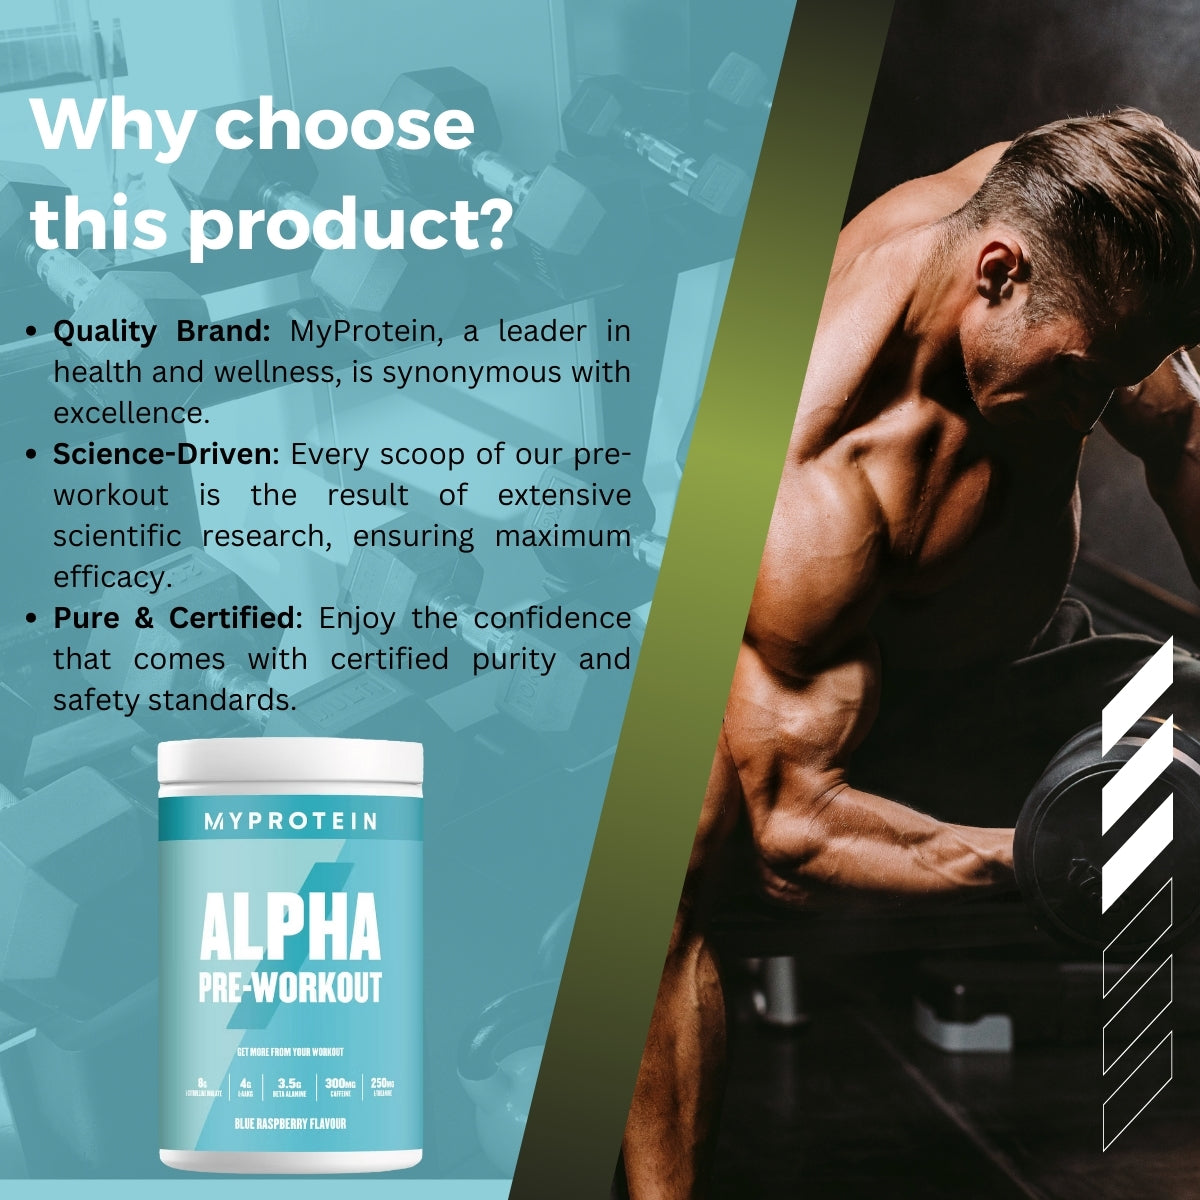 MyProtein Alpha Pre Workout - why choose